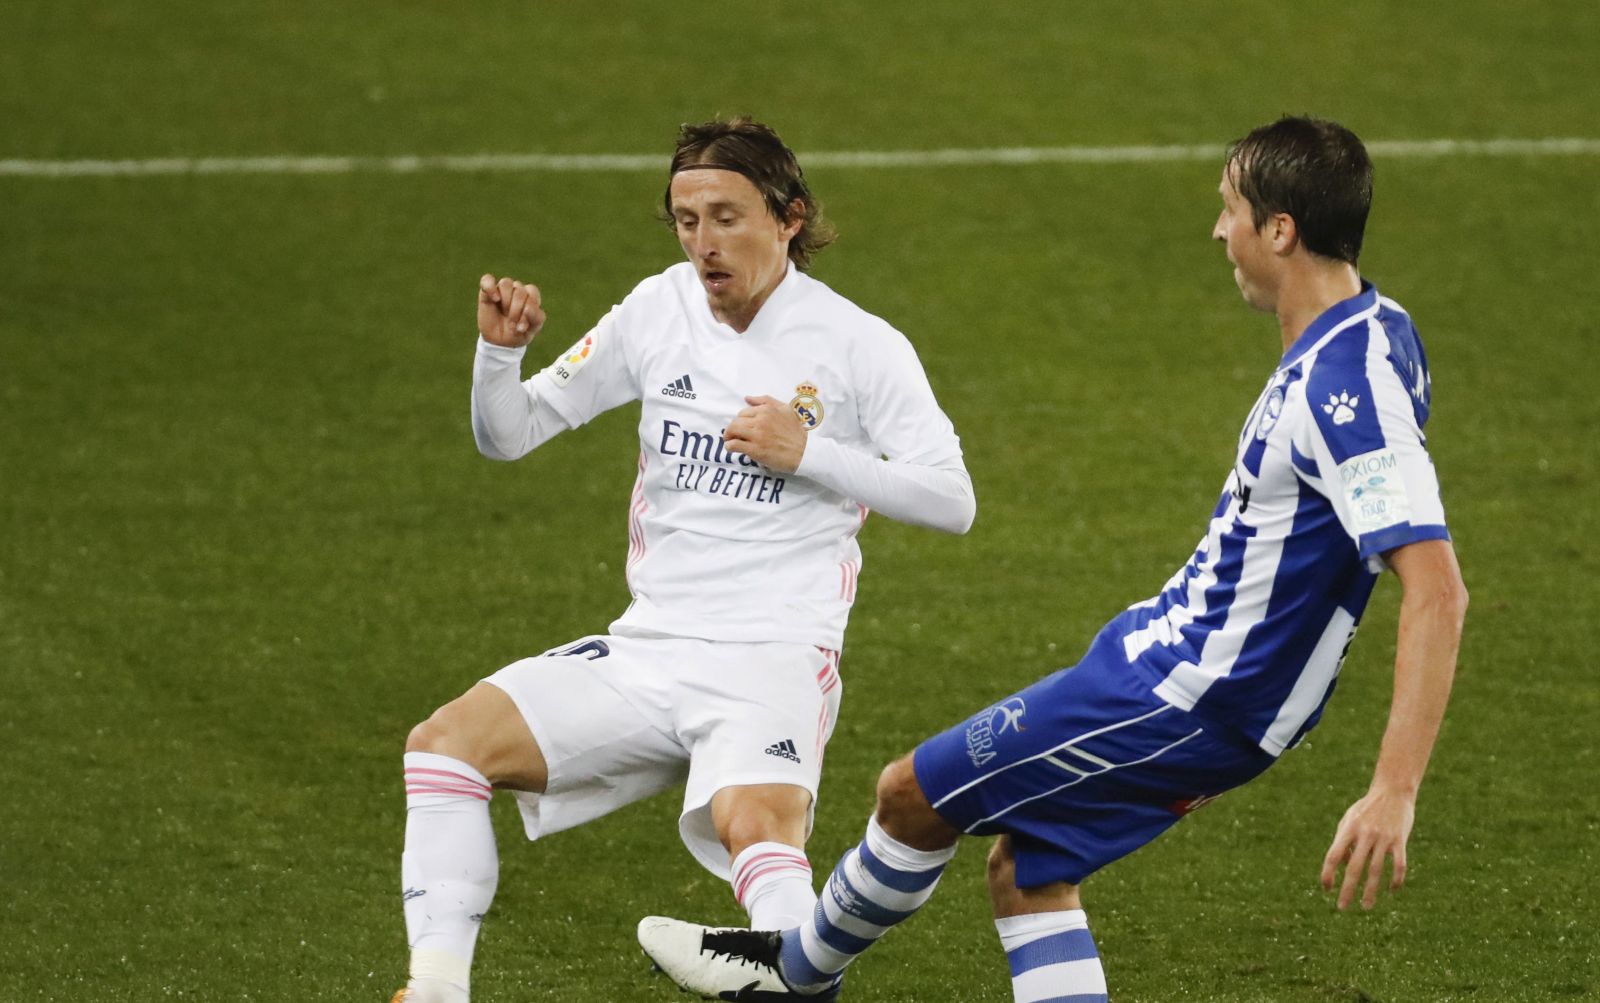 epa08961233 Alaves' midfielder Tomas Pina (R) in action against Real Madrid's midfielder Luka Modric (L) during the Spanish LaLiga soccer match between Deportivo Alaves and Real Madrid at Mendizorroza stadium in Vitoria, Basque Country, Spain, 23 January 2021.  EPA/Juriaan Tierie